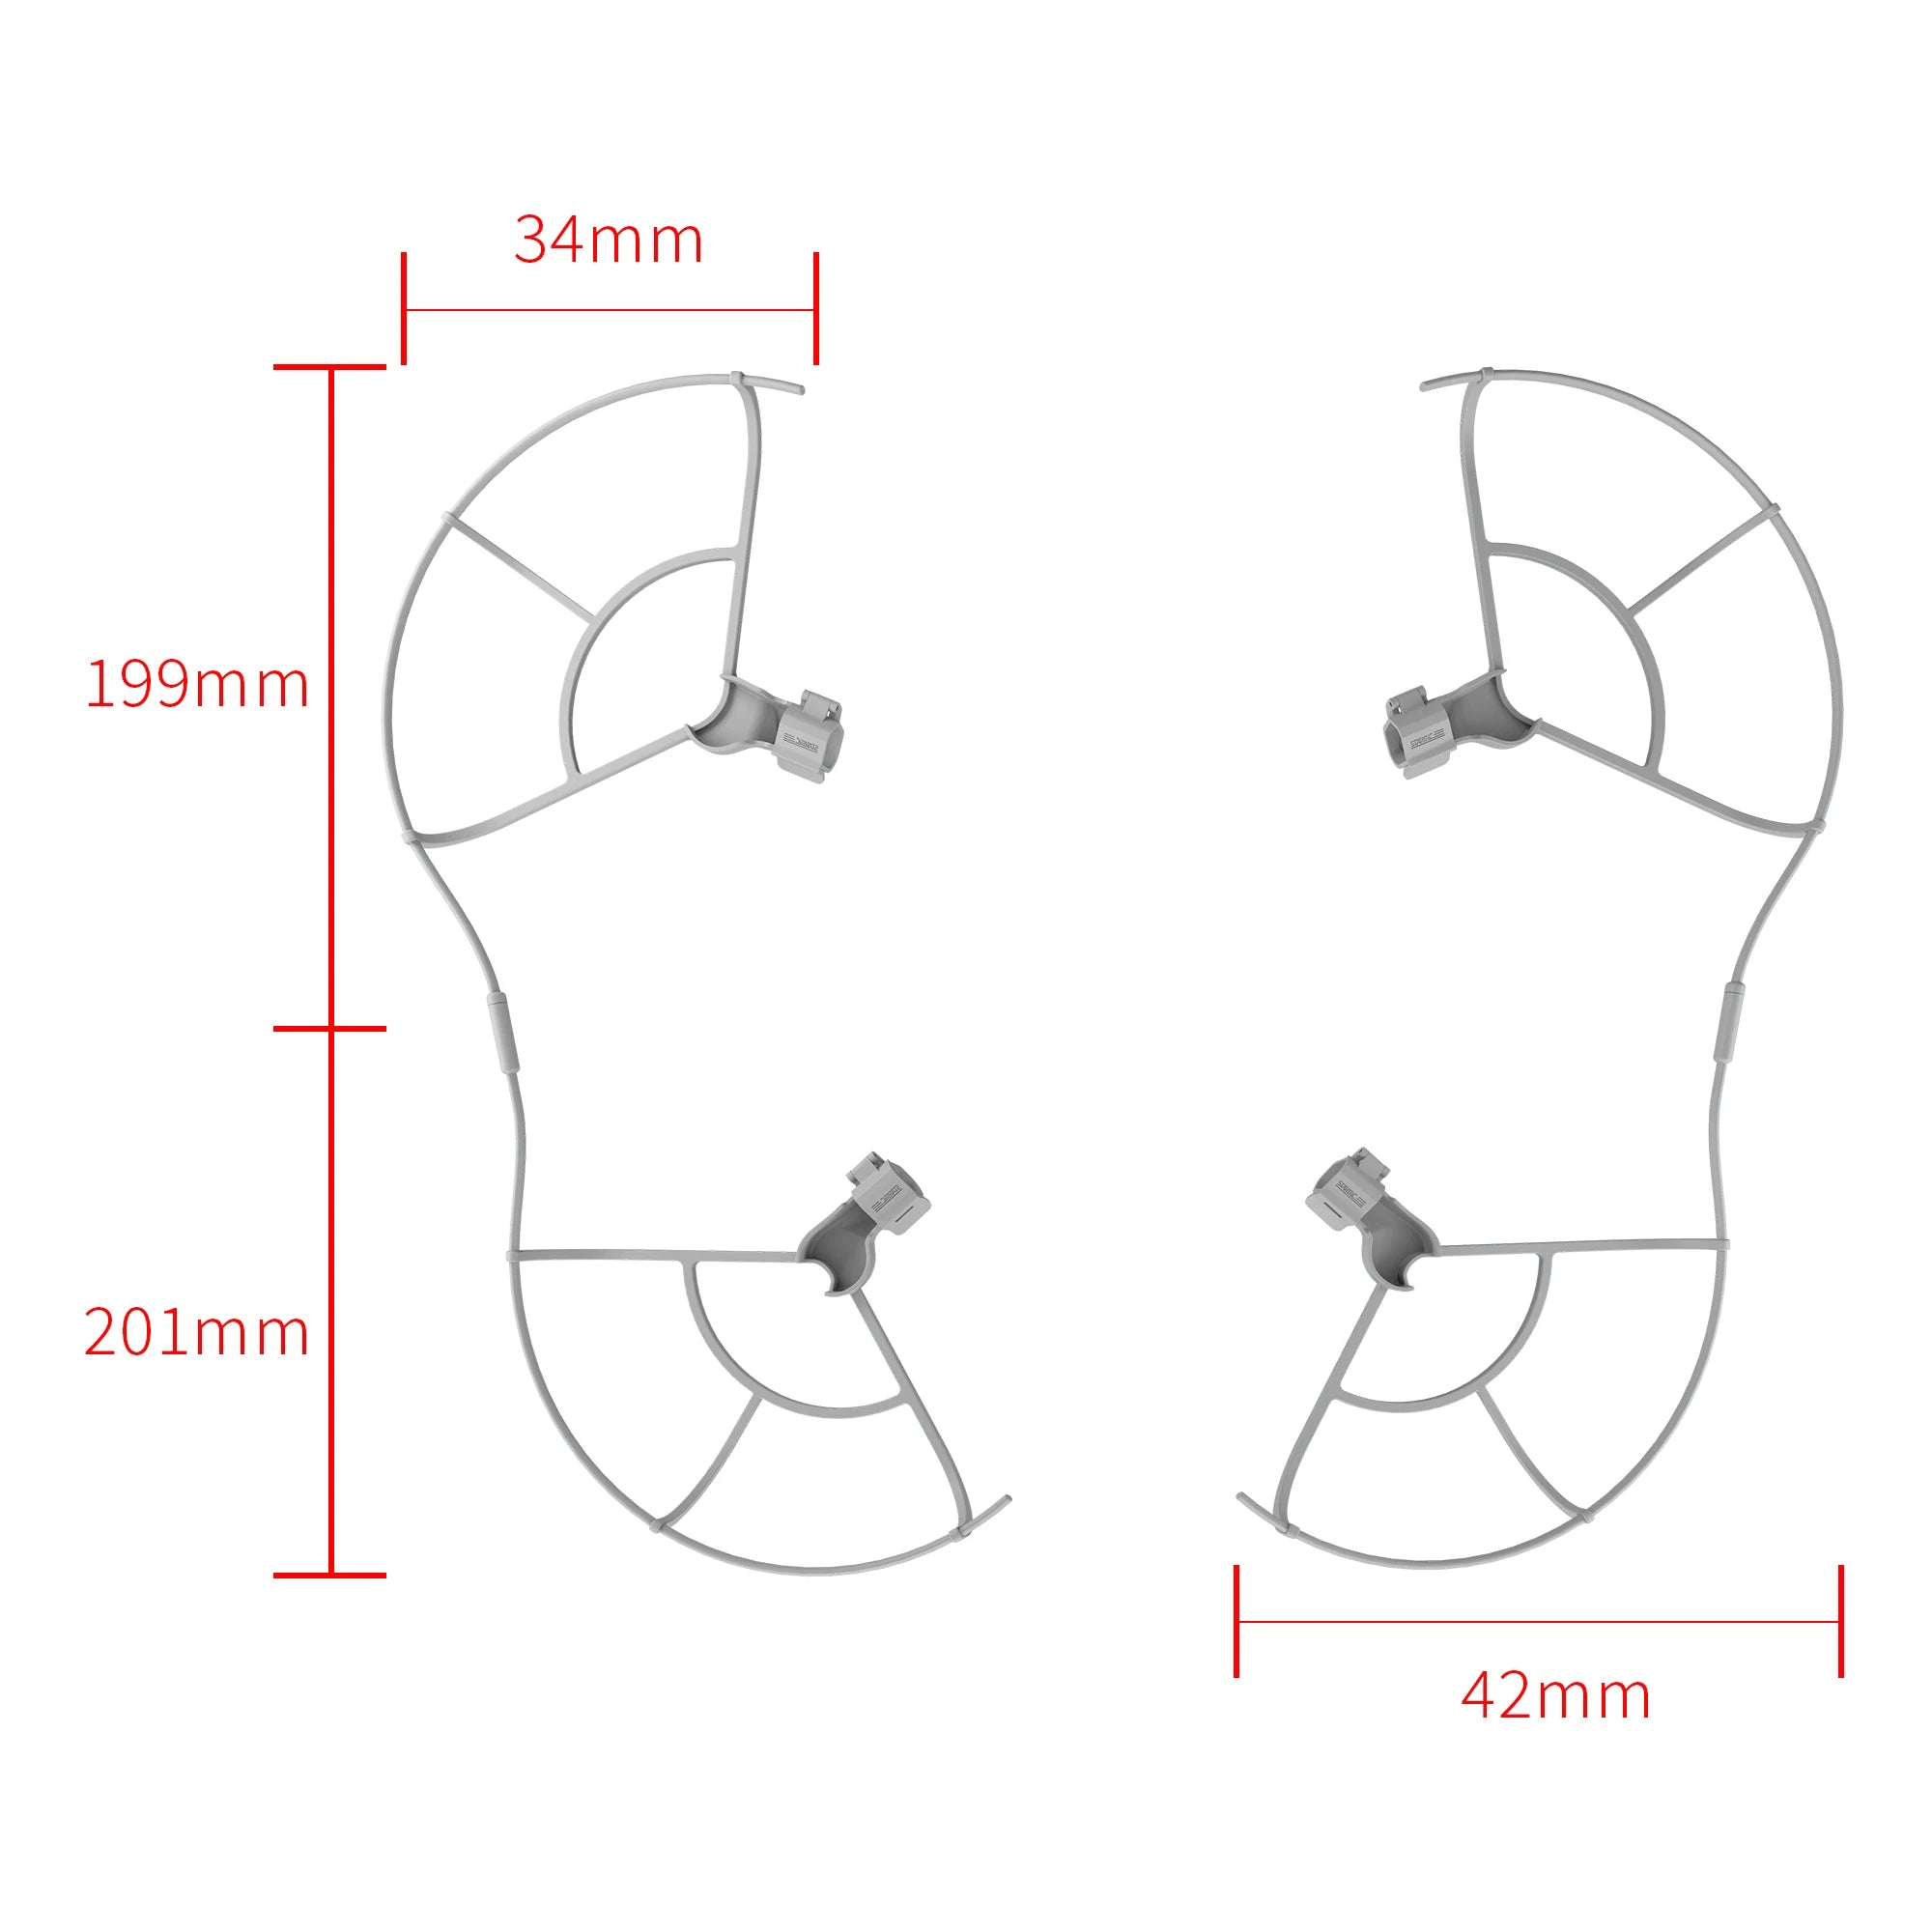 For DJI Mini 4 Pro Propeller Guard, the buckle design allows for quick assembly and disassembly without scratching the drone